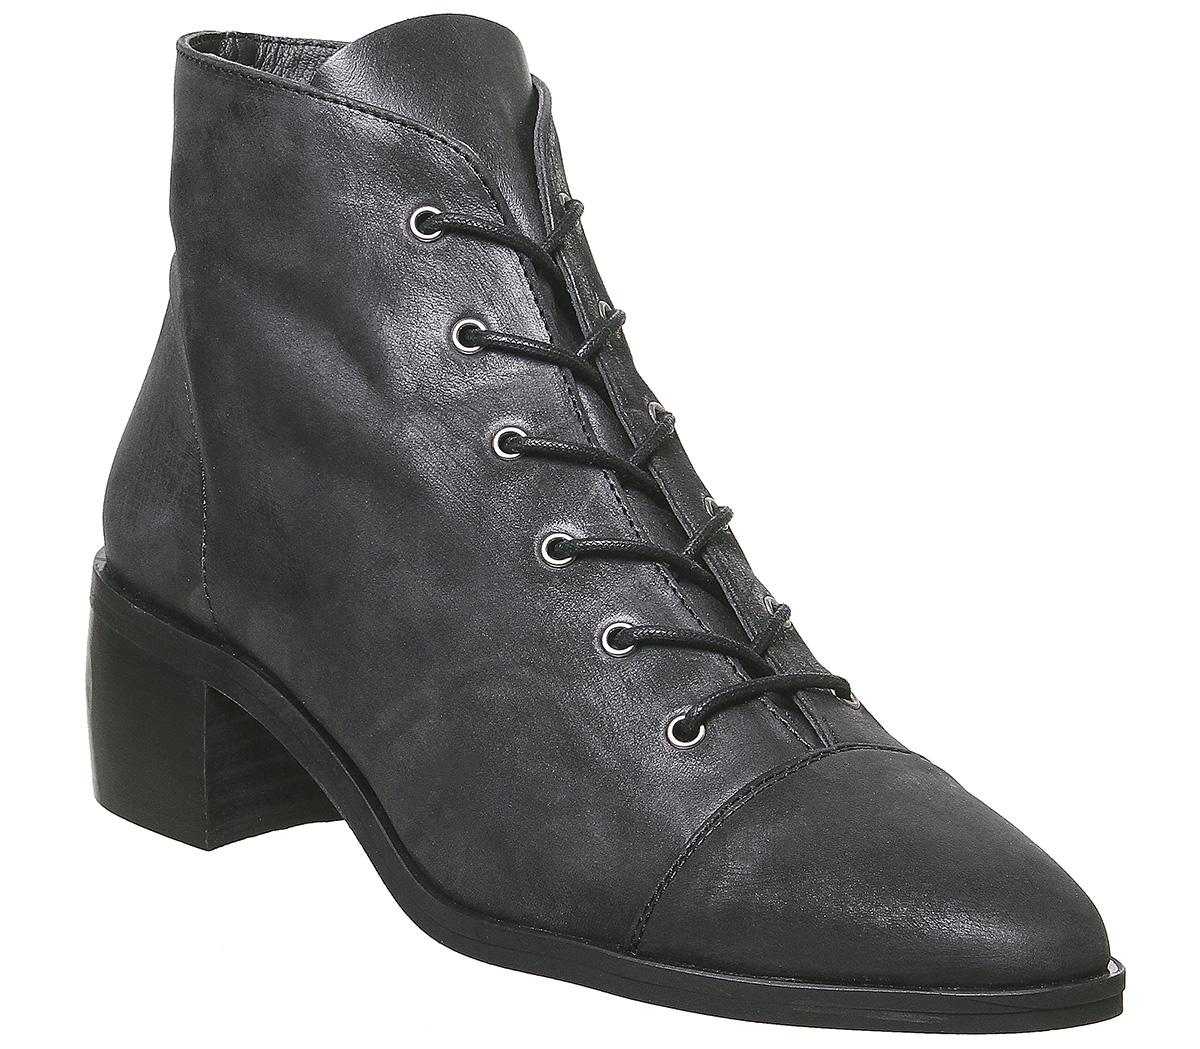 OFFICE Accord Lace Up Boots Black Leather - Women's Ankle Boots